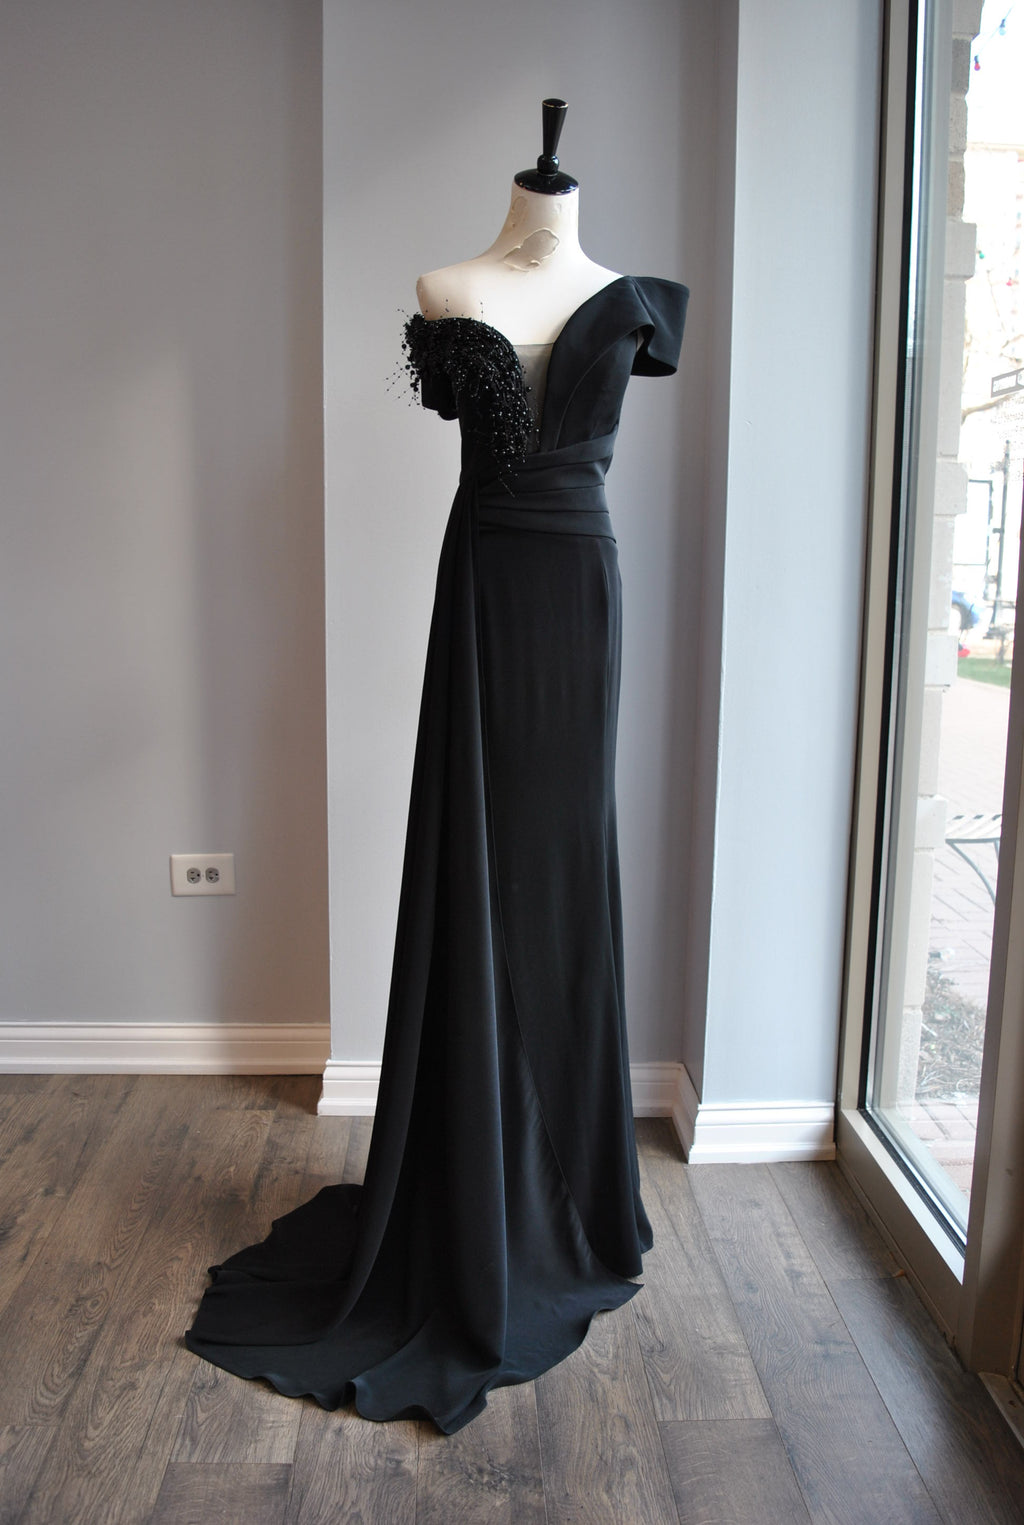 BLACK EVENING GOWN WITH SIDE PEARLS